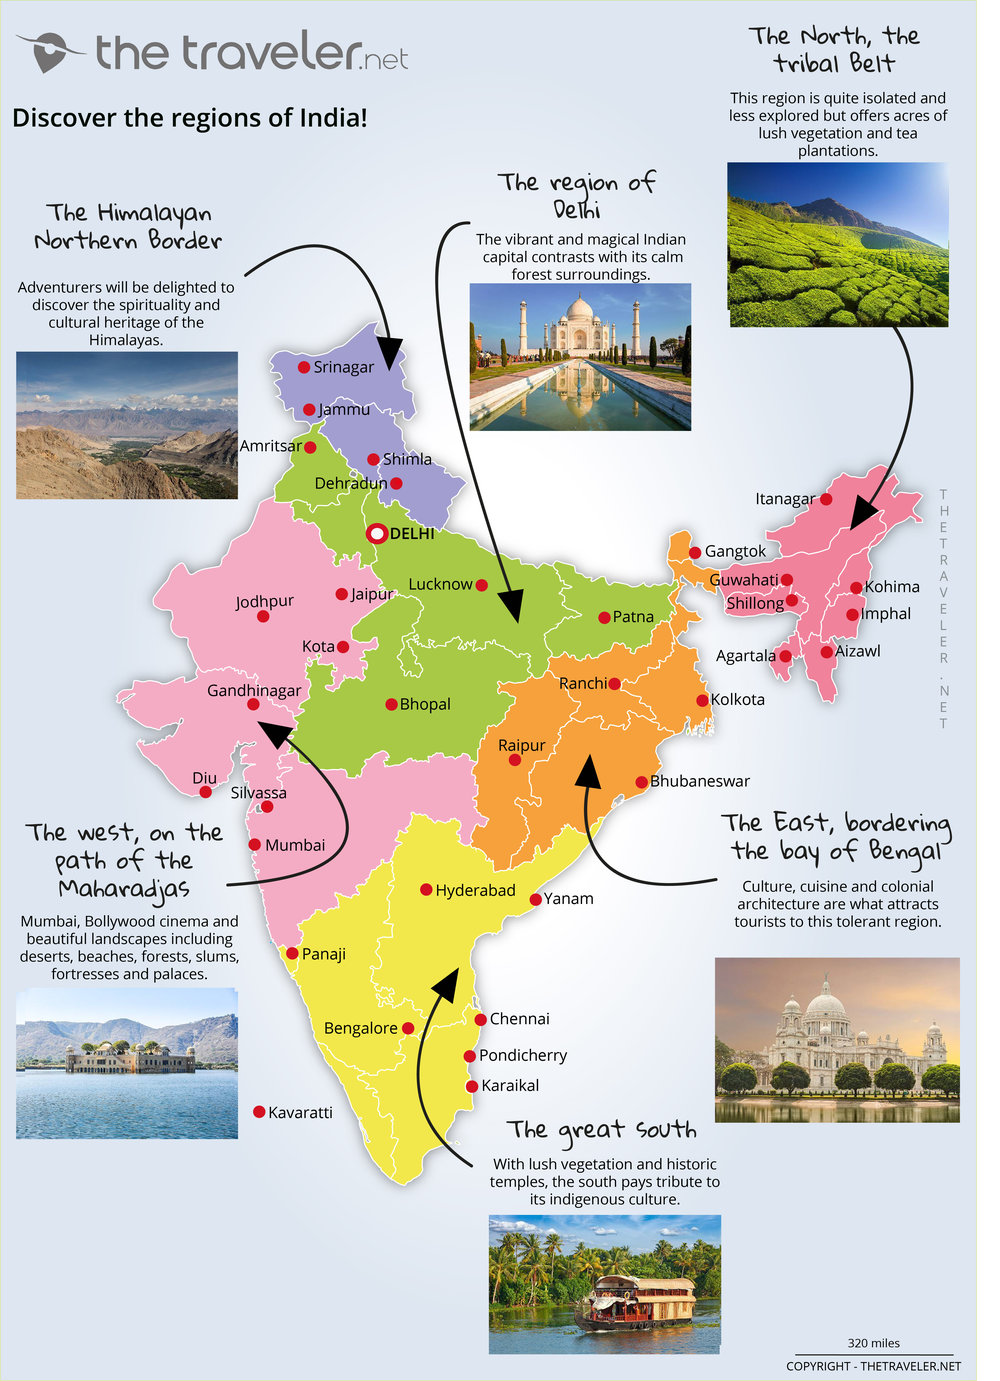 Places To Visit India Tourist Maps And Must See Attractions